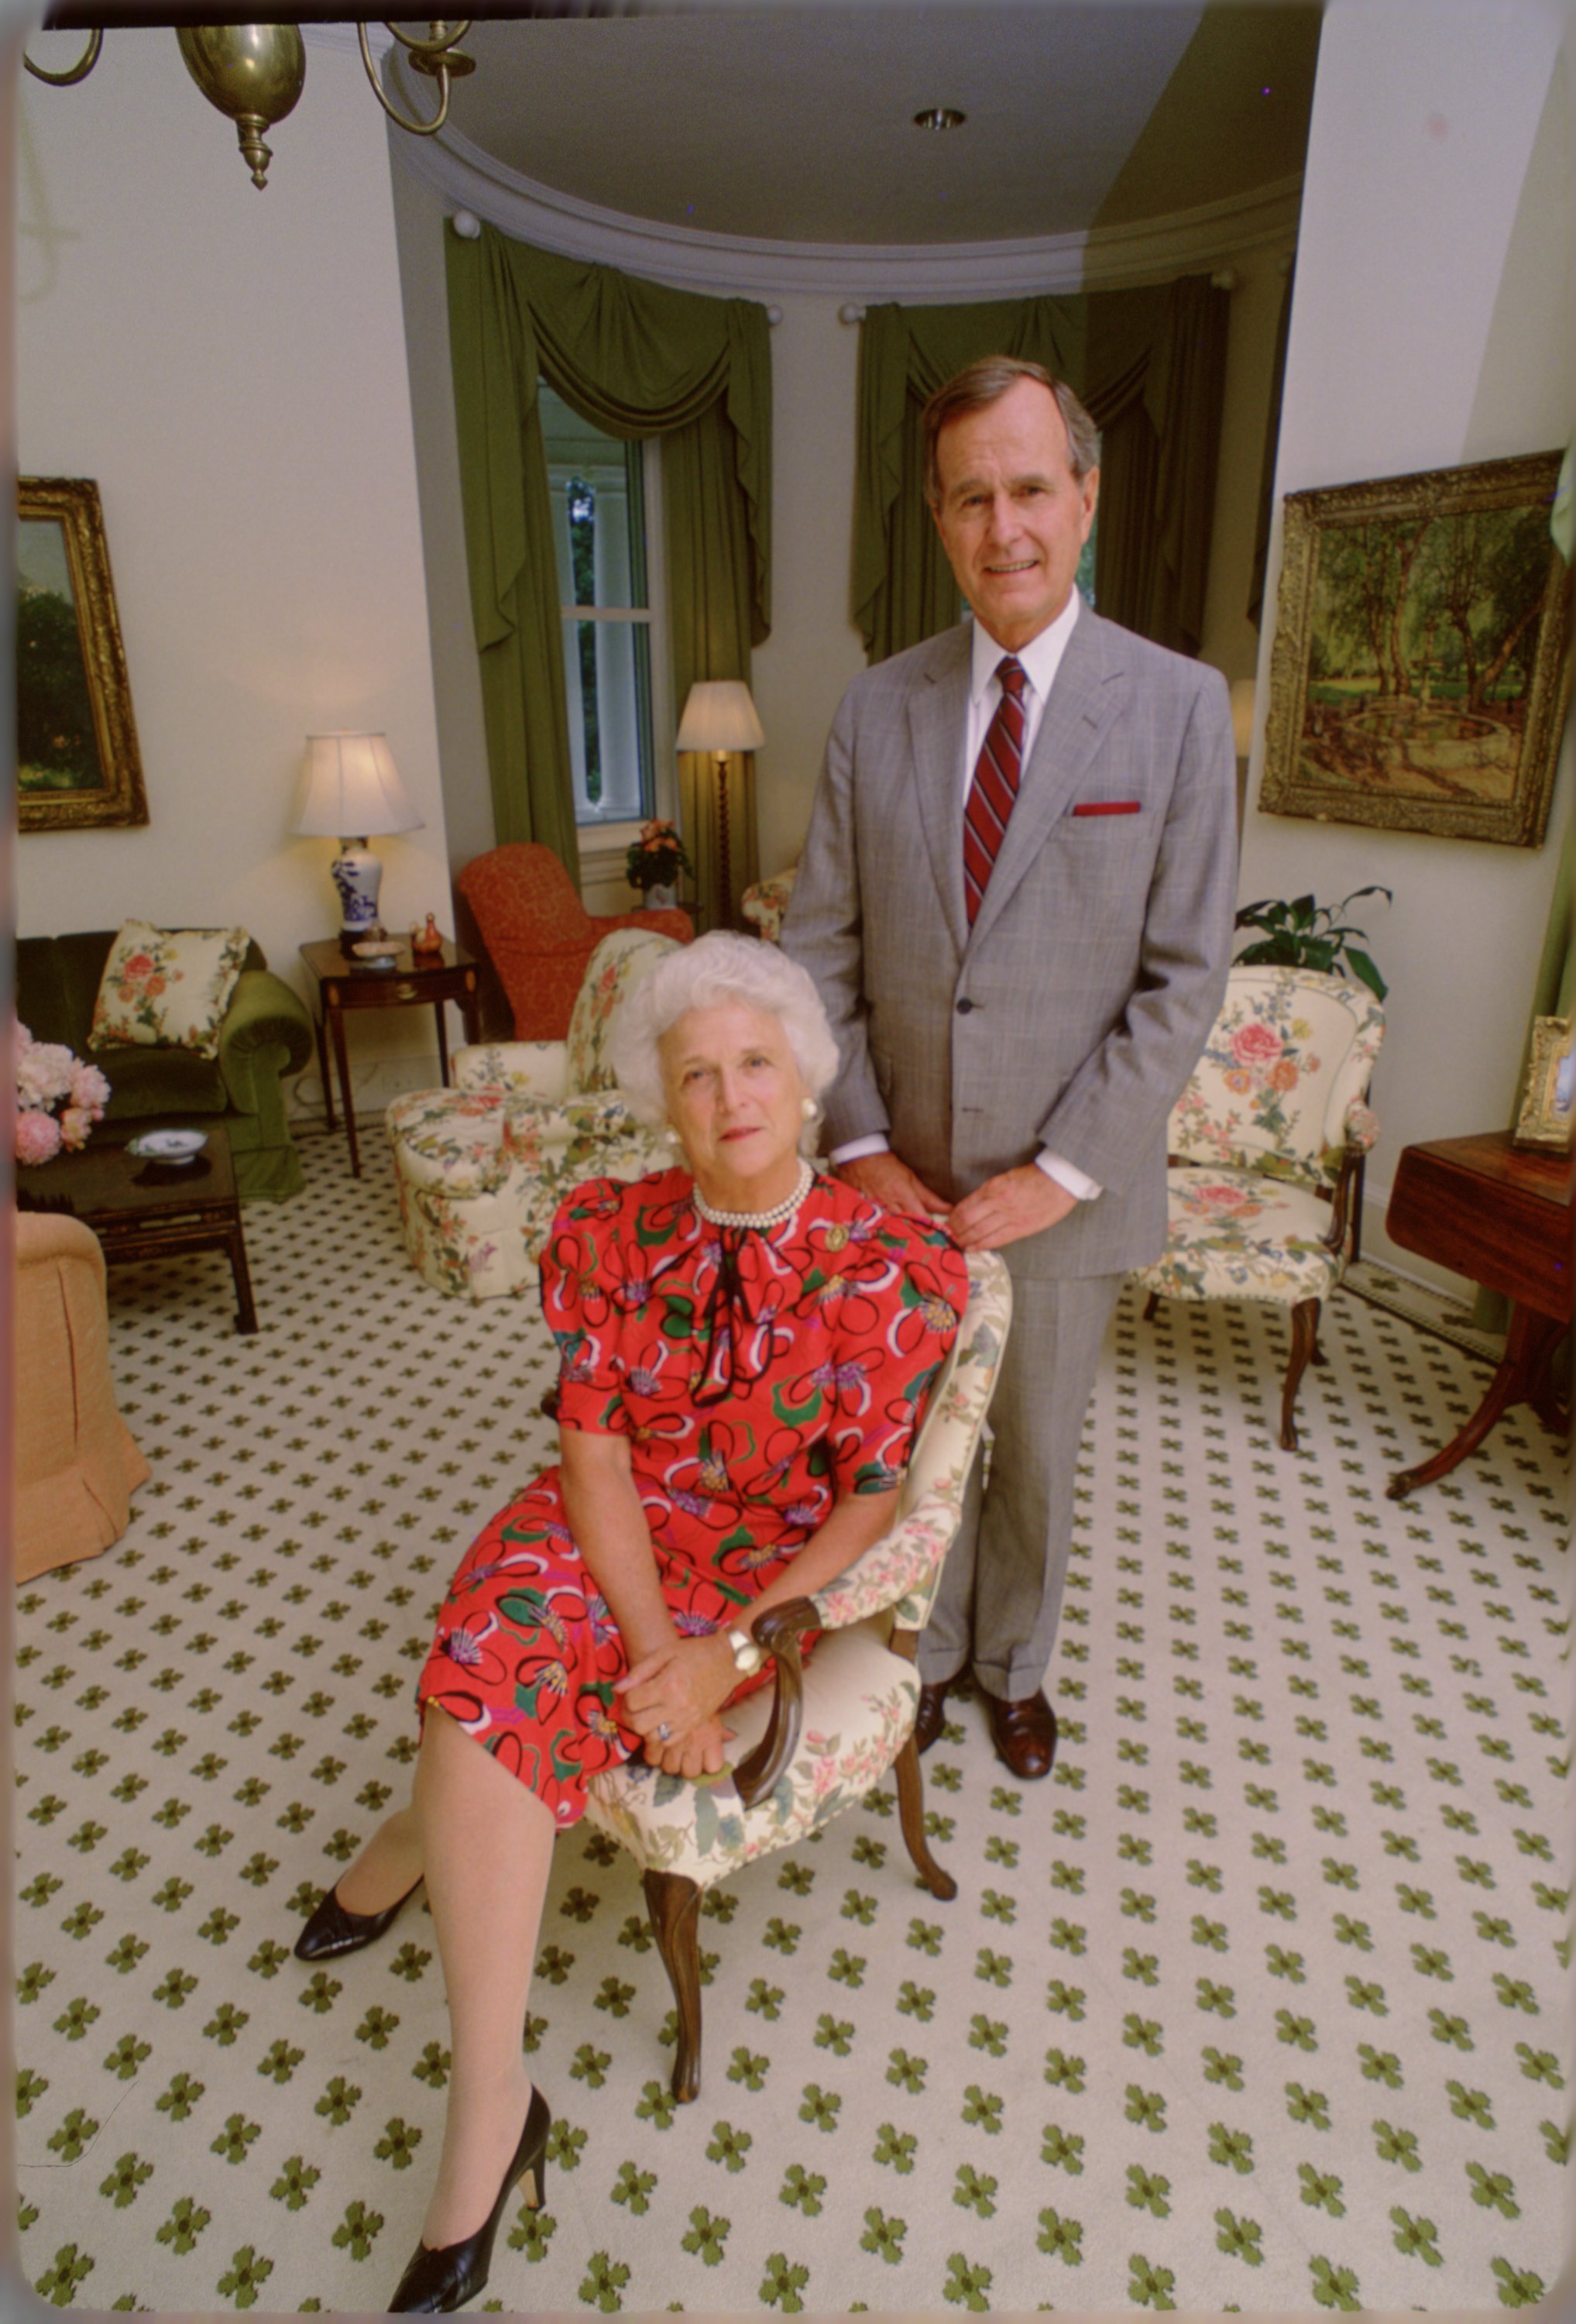  U.S. Vice President George H.W. Bush and Mrs. Barbara Bush at the Vice President's residence circa 1983 in in Washington, DC. | Source: Getty Images